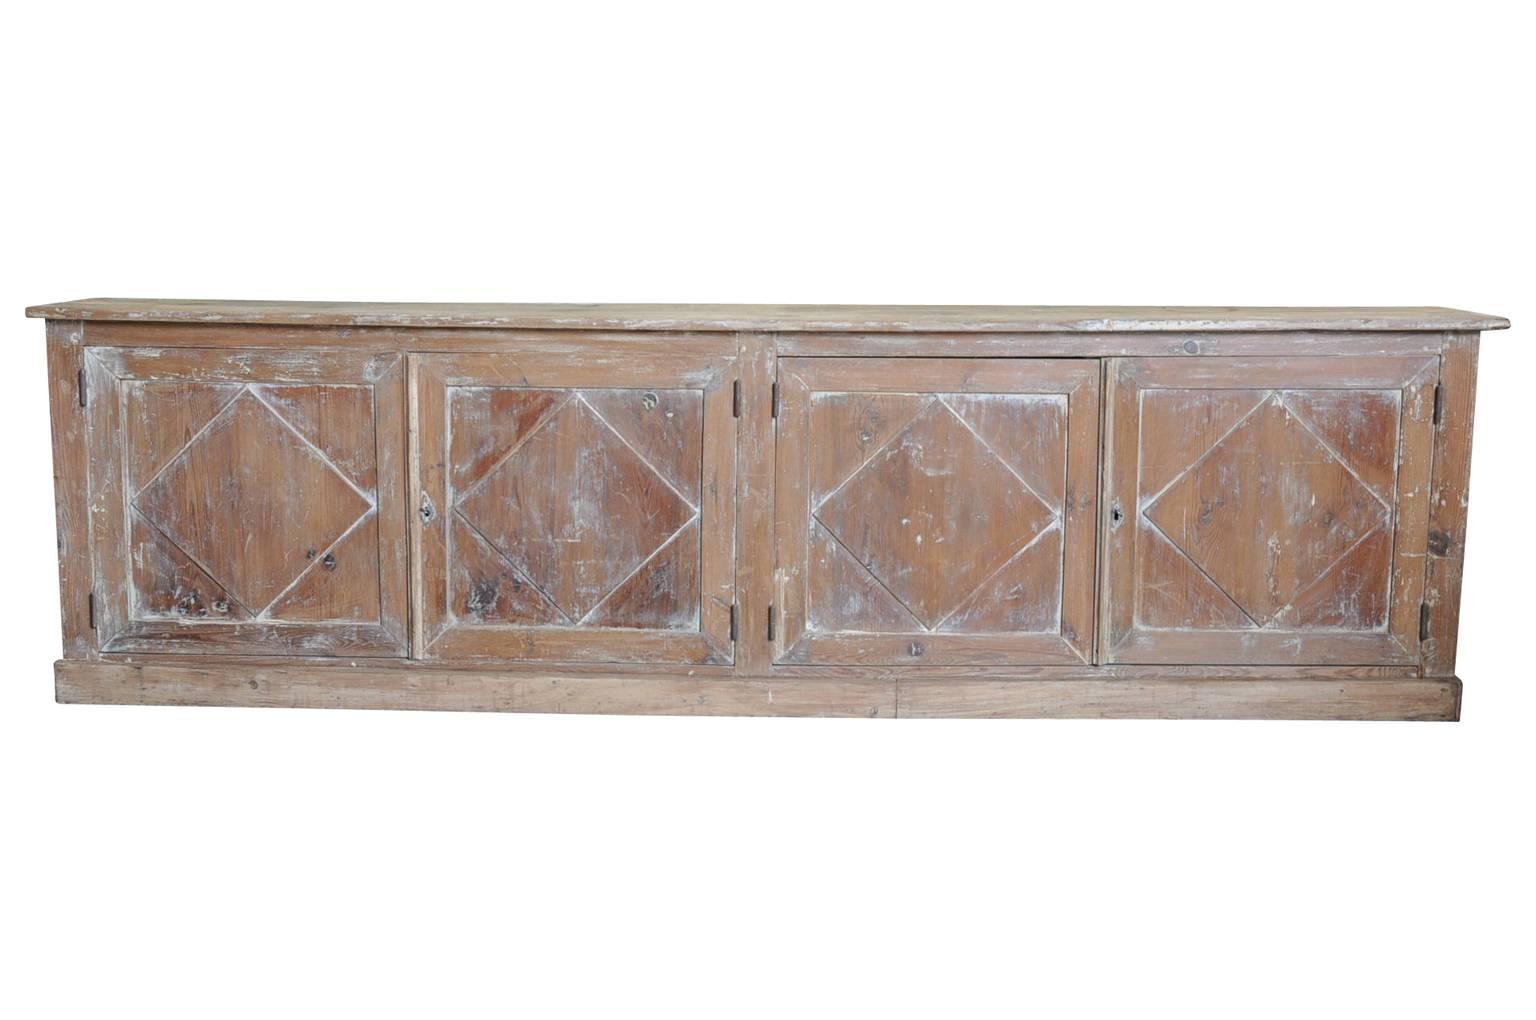 A very beautiful early 19th century buffet enfilade from the South of France. Soundly constructed in washed bleached wood with four doors. Nice narrow depth considering the length of the piece. A terrific storage piece.